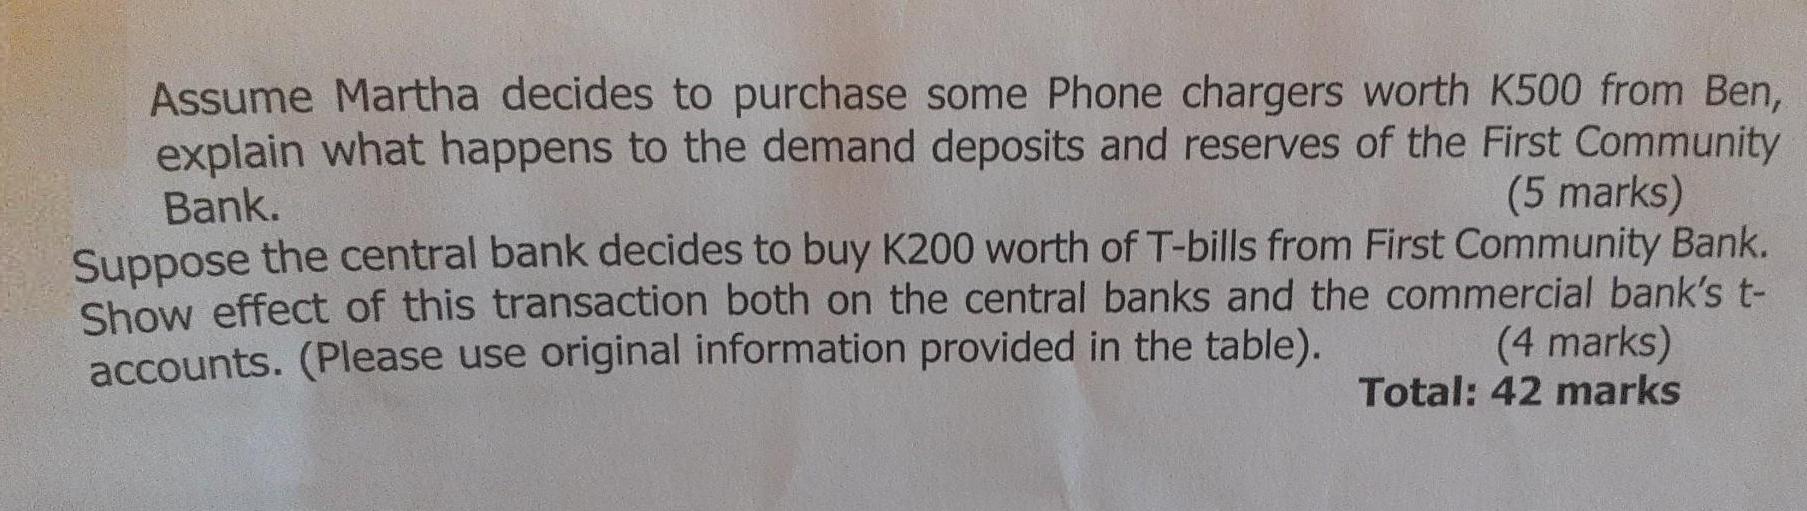 Assume Martha decides to purchase some Phone chargers worth K500 from Ben, explain what happens to the demand